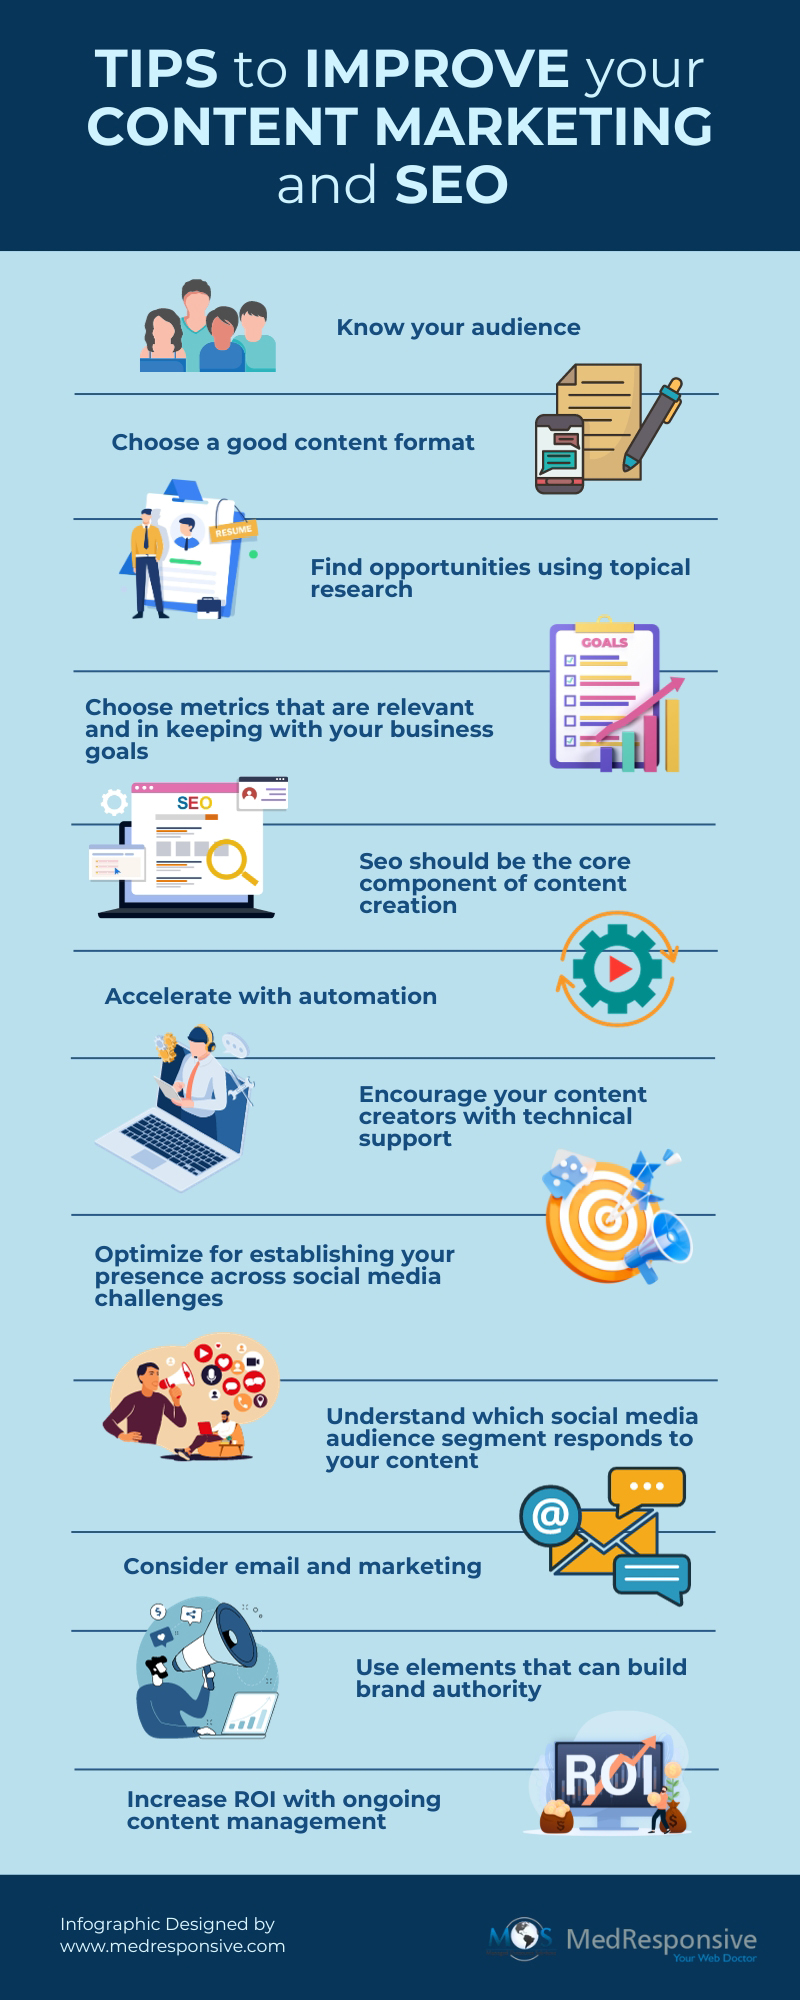 Tips to Improve Content Marketing